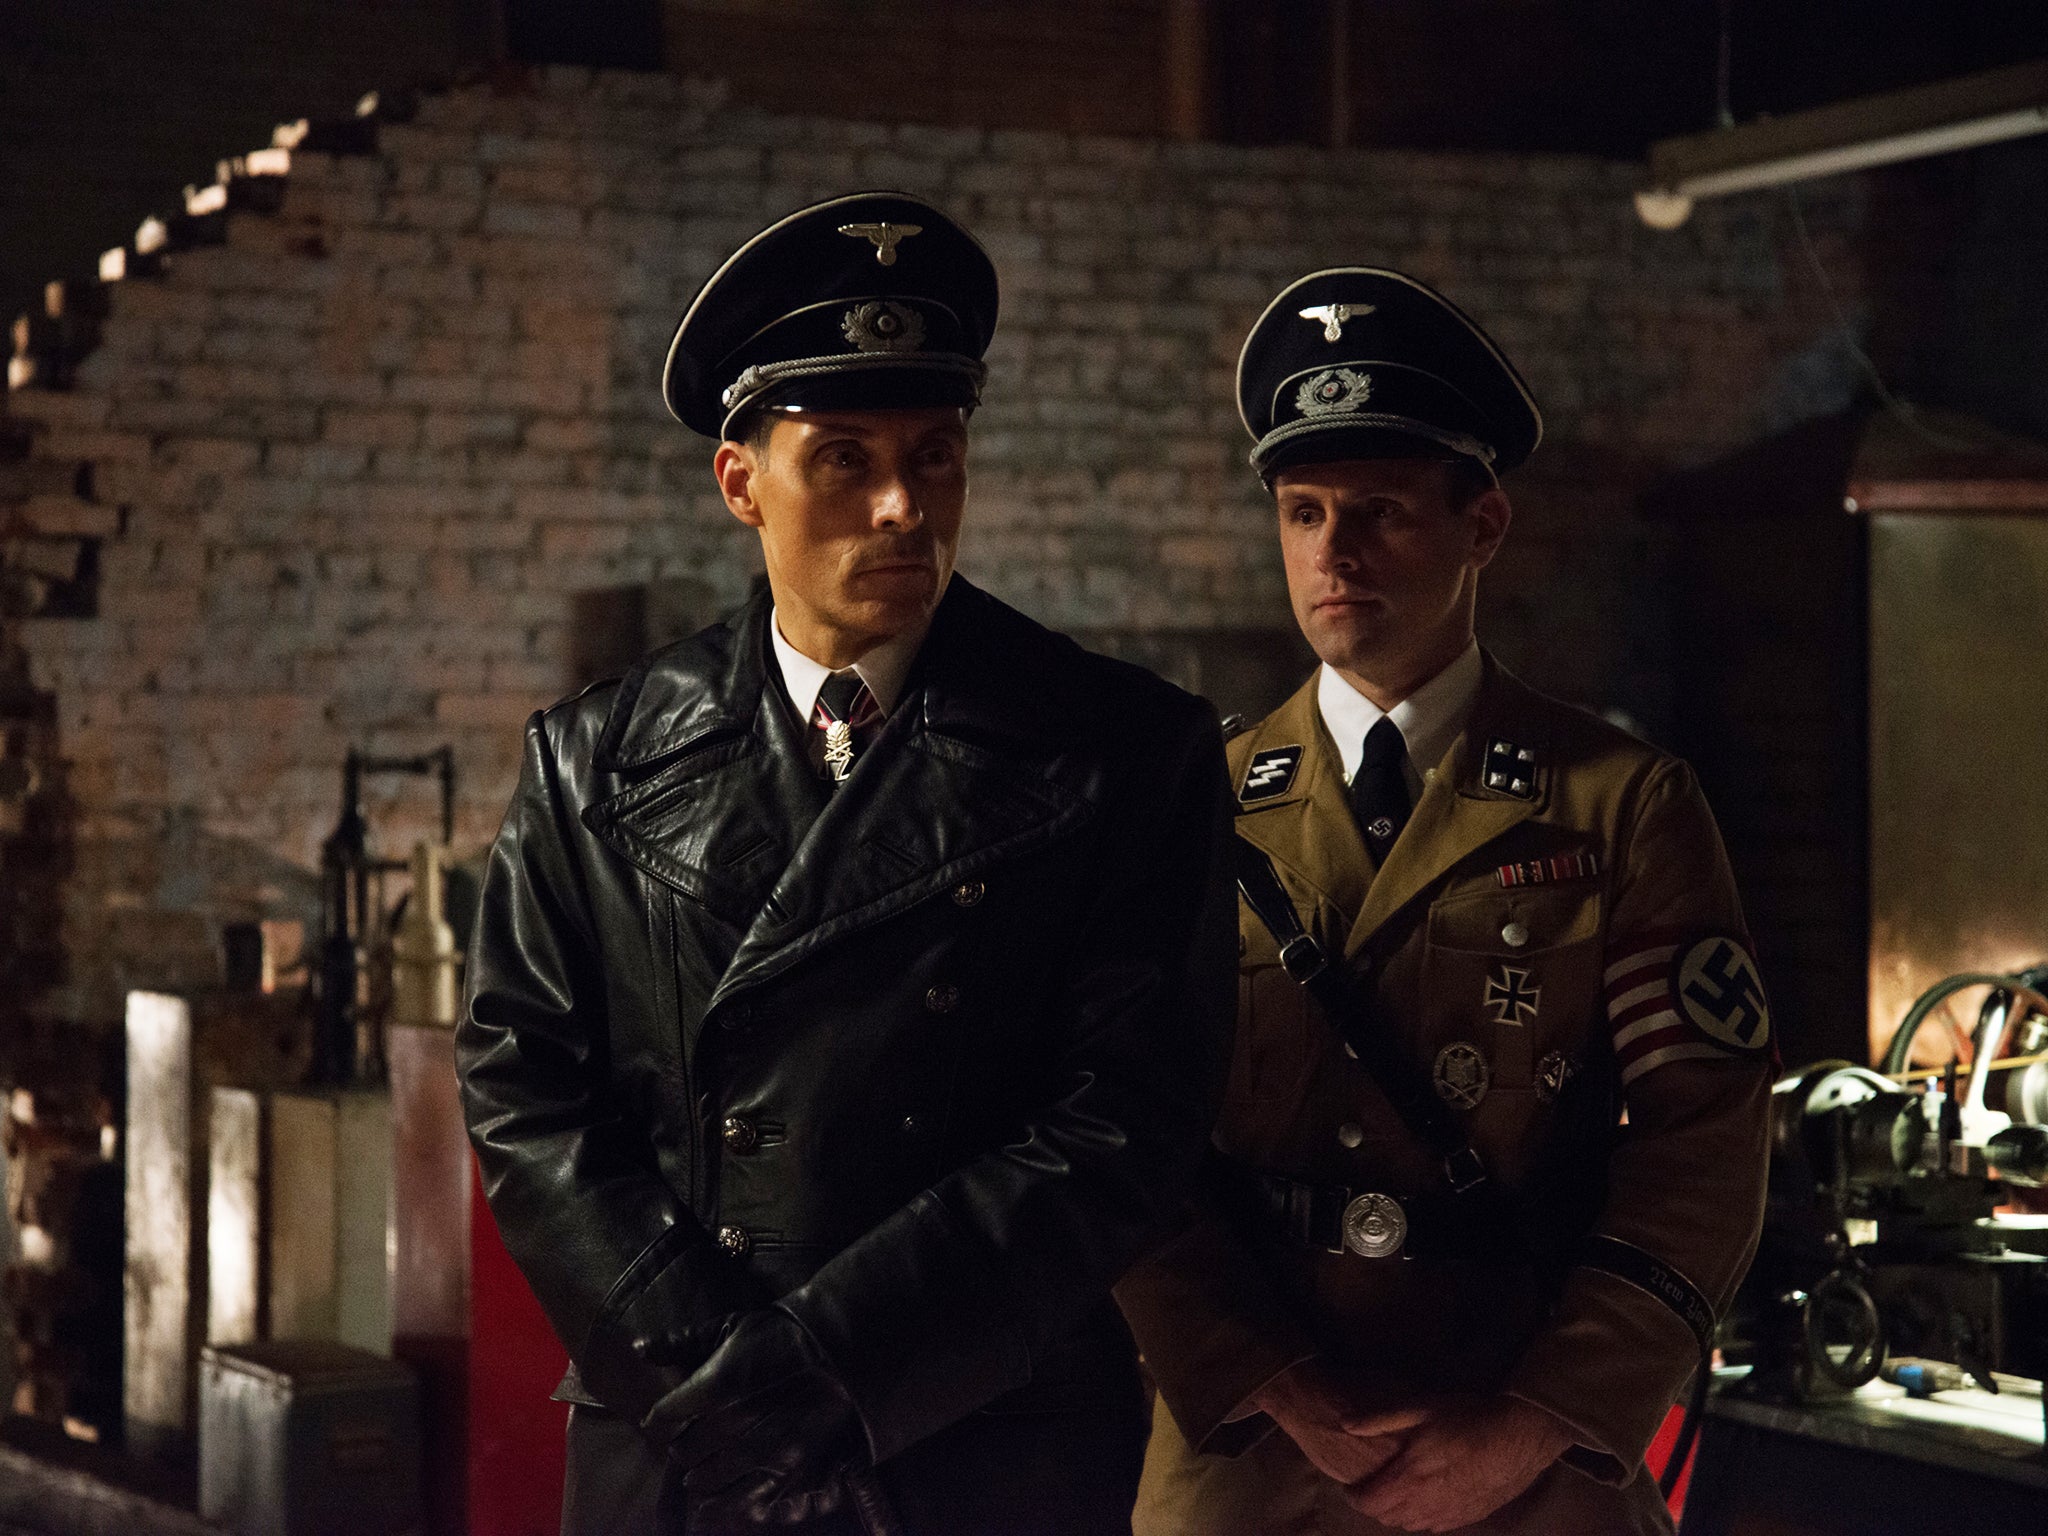 British actor Rufus Sewell plays a sadistic Nazi commander in New York